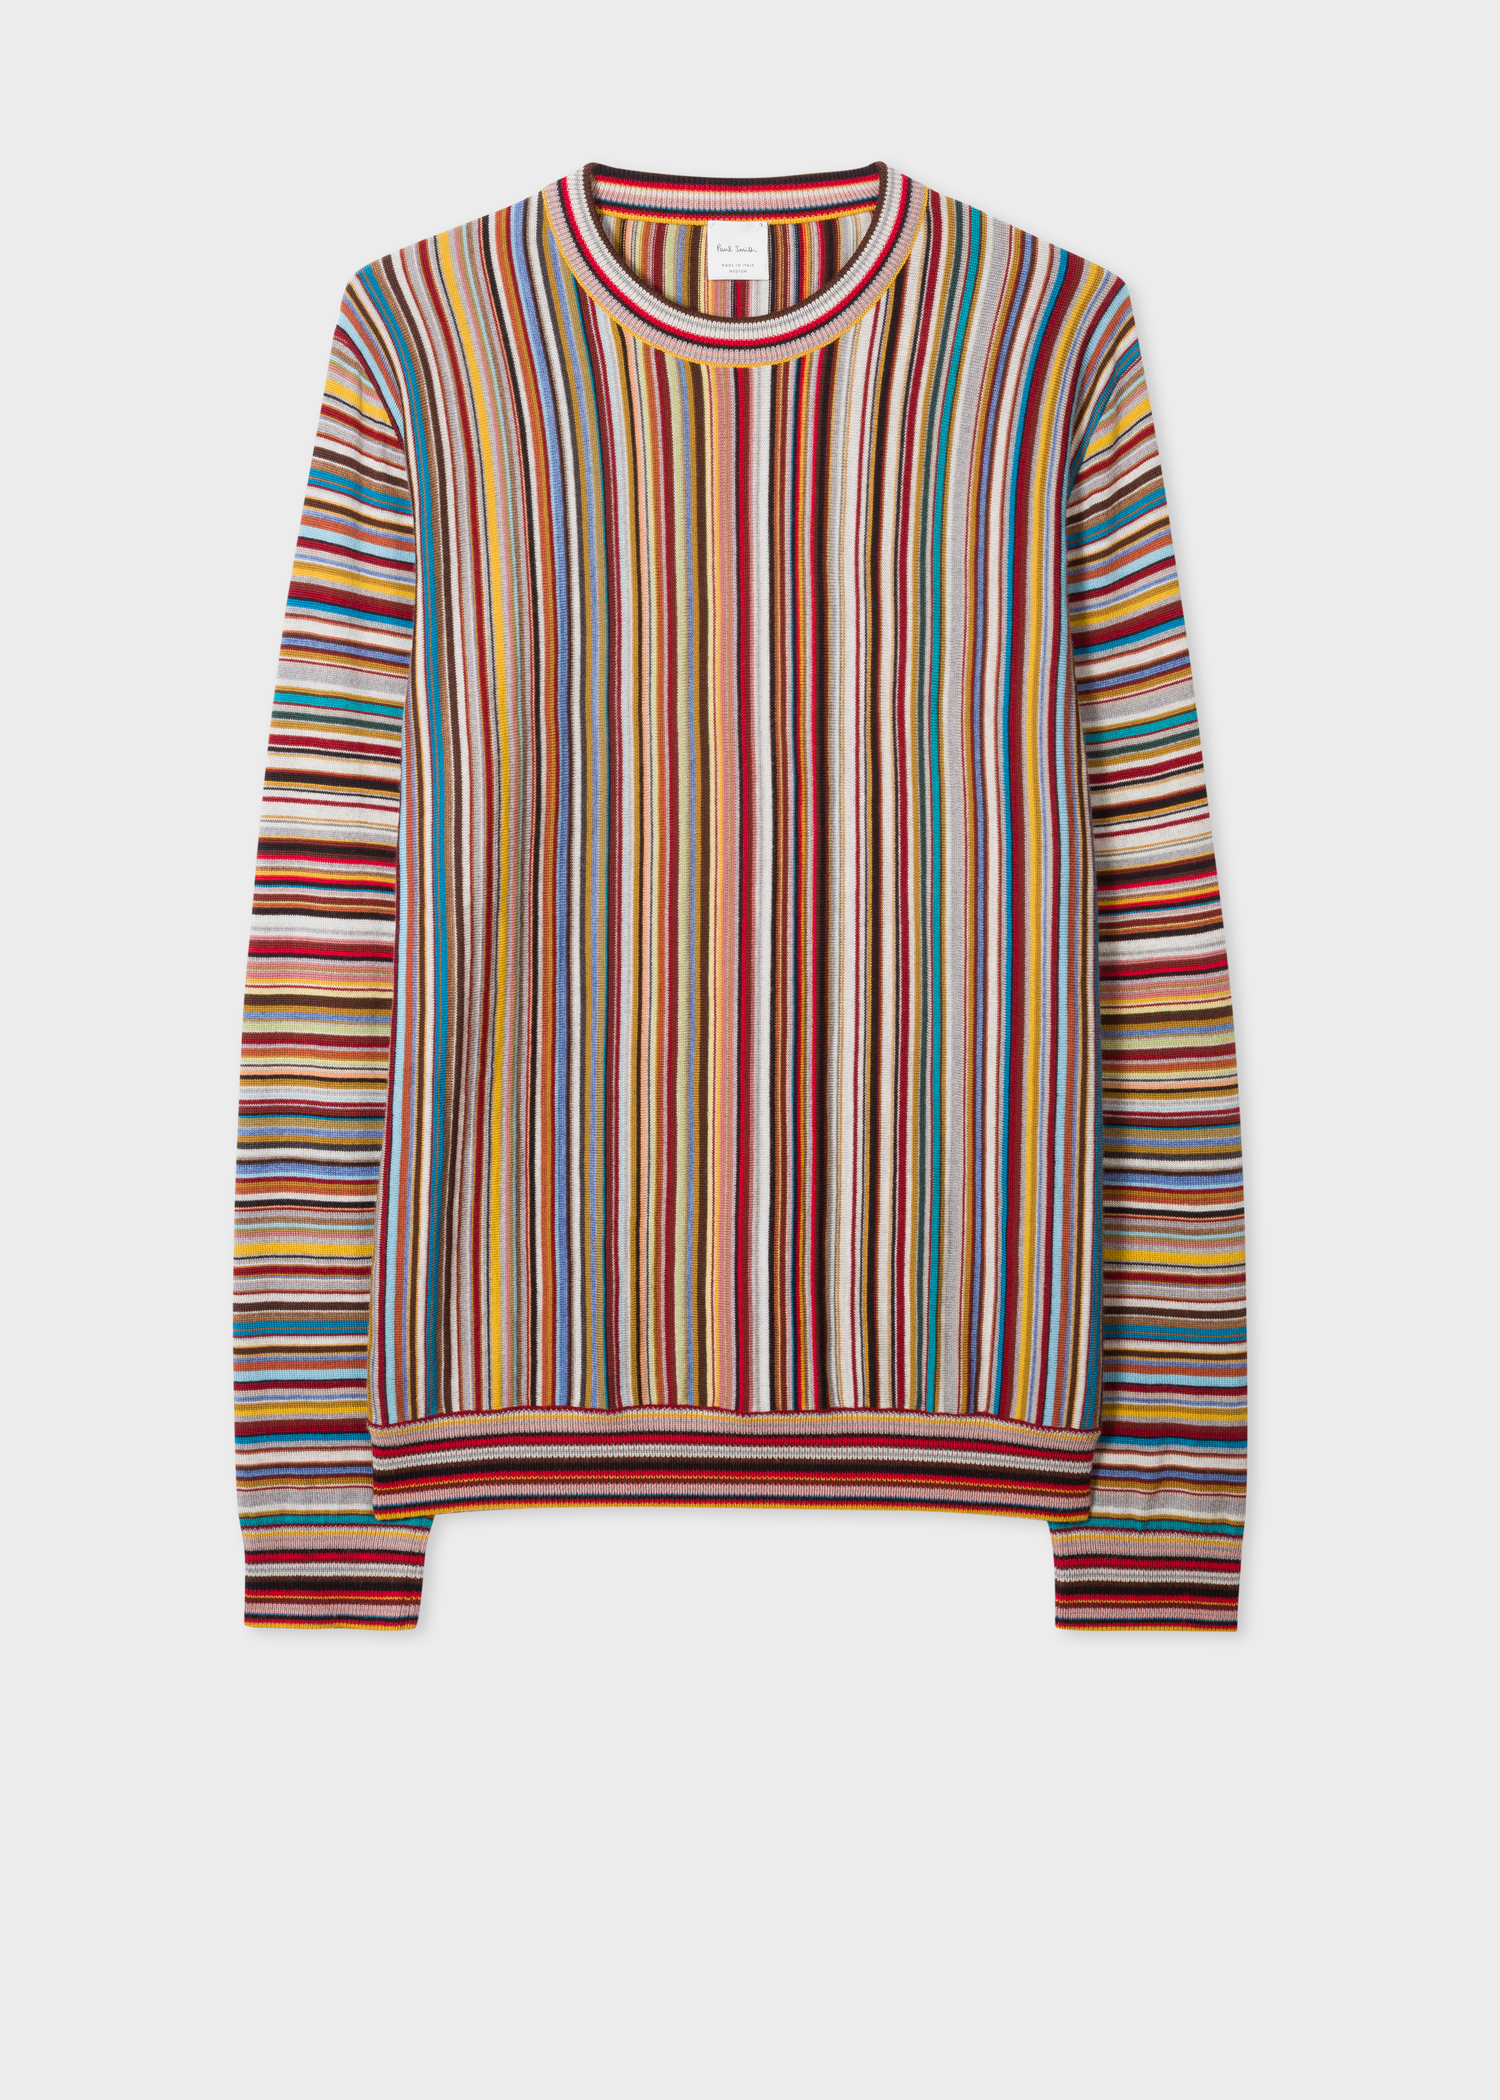 Front view - Men's 'Signature Stripe' Wool Sweater Paul Smith